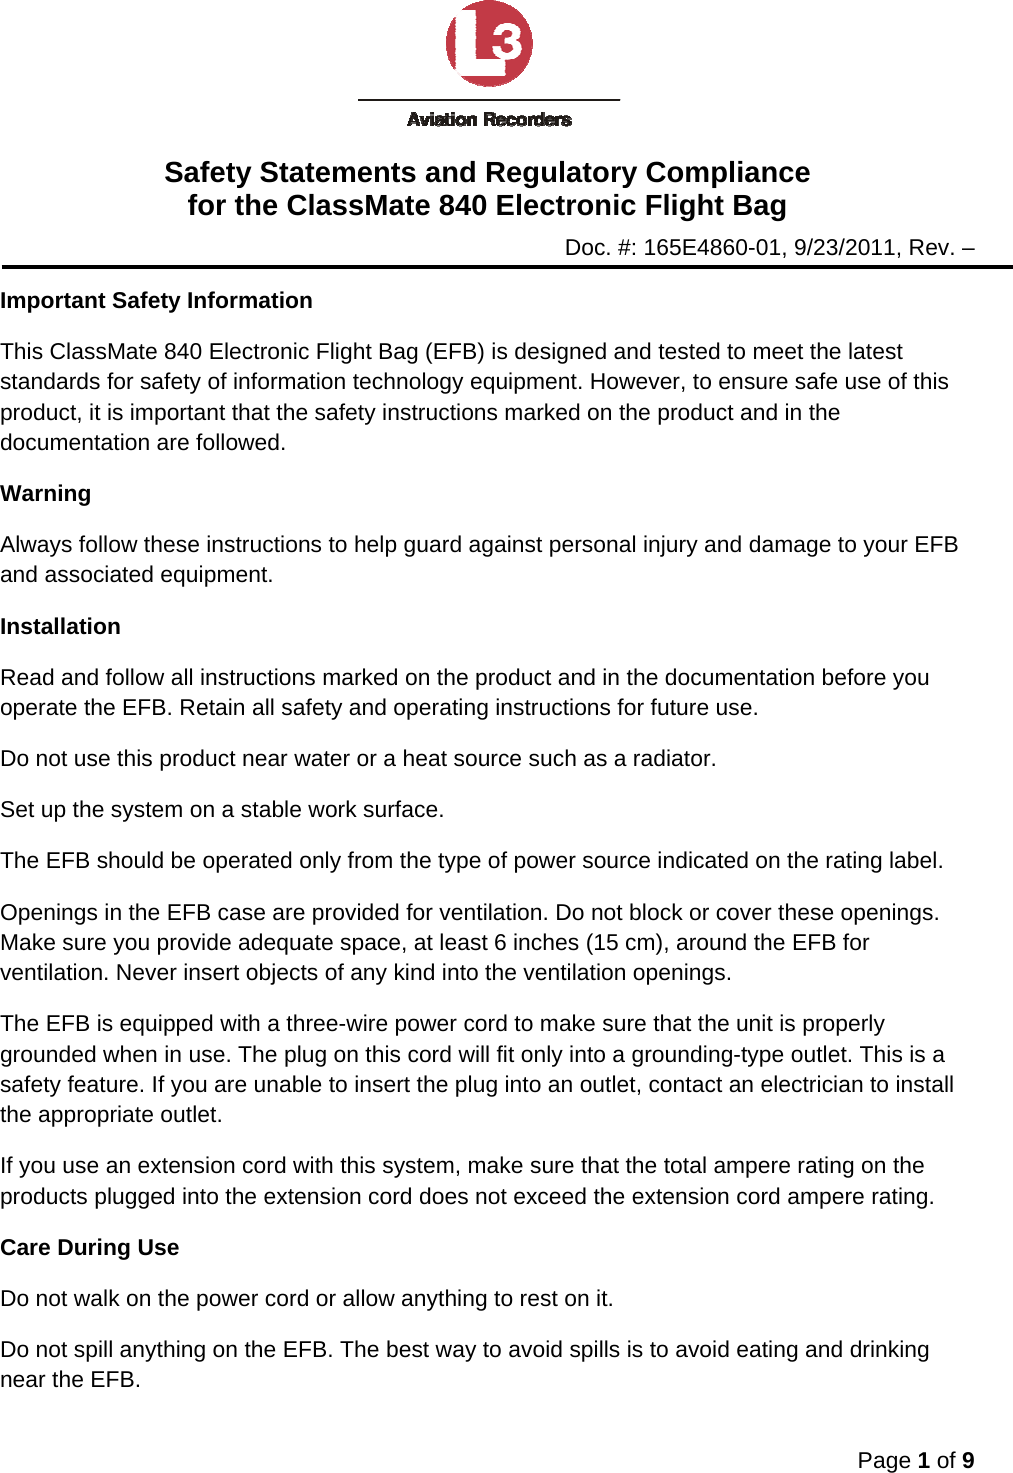 Safety Statements and Regulatory Compliance for the ClassMate 840 Electronic Flight Bag Doc. #: 165E4860-01, 9/23/2011, Rev. –  Page 1 of 9  Important Safety Information This ClassMate 840 Electronic Flight Bag (EFB) is designed and tested to meet the latest standards for safety of information technology equipment. However, to ensure safe use of this product, it is important that the safety instructions marked on the product and in the documentation are followed. Warning Always follow these instructions to help guard against personal injury and damage to your EFB and associated equipment. Installation Read and follow all instructions marked on the product and in the documentation before you operate the EFB. Retain all safety and operating instructions for future use. Do not use this product near water or a heat source such as a radiator. Set up the system on a stable work surface. The EFB should be operated only from the type of power source indicated on the rating label. Openings in the EFB case are provided for ventilation. Do not block or cover these openings. Make sure you provide adequate space, at least 6 inches (15 cm), around the EFB for ventilation. Never insert objects of any kind into the ventilation openings. The EFB is equipped with a three-wire power cord to make sure that the unit is properly grounded when in use. The plug on this cord will fit only into a grounding-type outlet. This is a safety feature. If you are unable to insert the plug into an outlet, contact an electrician to install the appropriate outlet. If you use an extension cord with this system, make sure that the total ampere rating on the products plugged into the extension cord does not exceed the extension cord ampere rating. Care During Use Do not walk on the power cord or allow anything to rest on it. Do not spill anything on the EFB. The best way to avoid spills is to avoid eating and drinking near the EFB. 